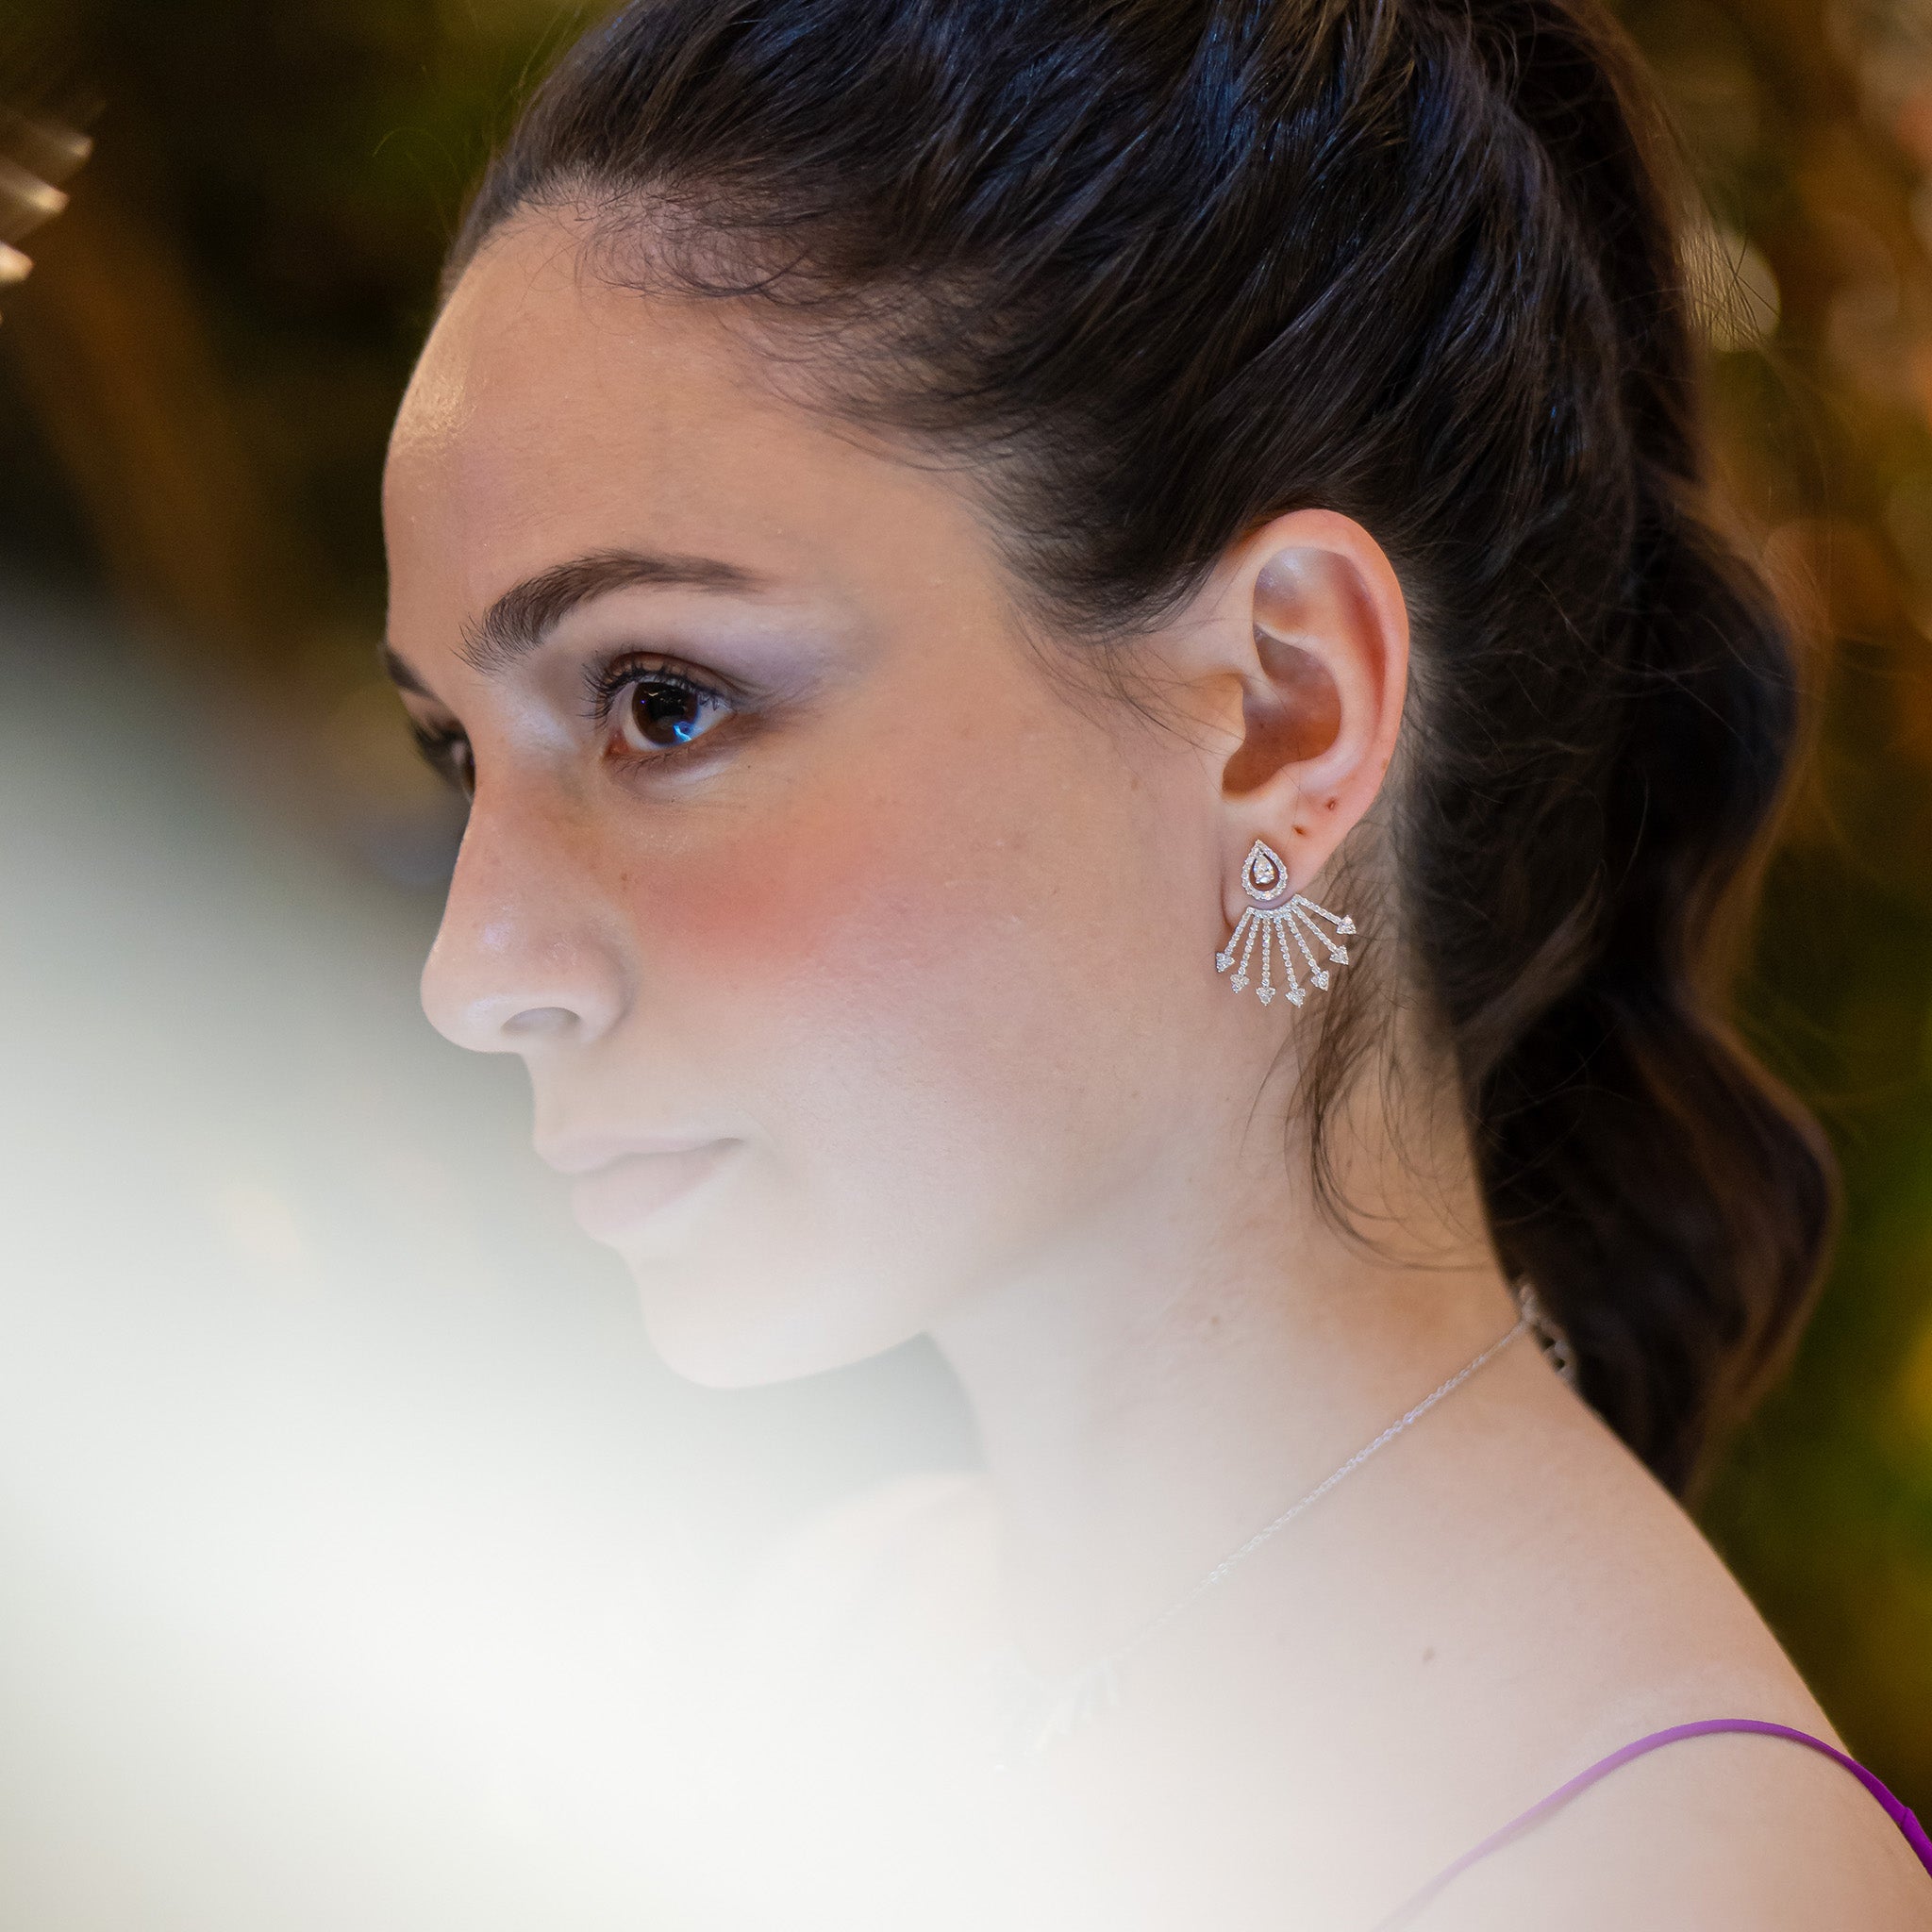 Diamond stud earrings with optional extensions, fine jewellery showcased on a model.